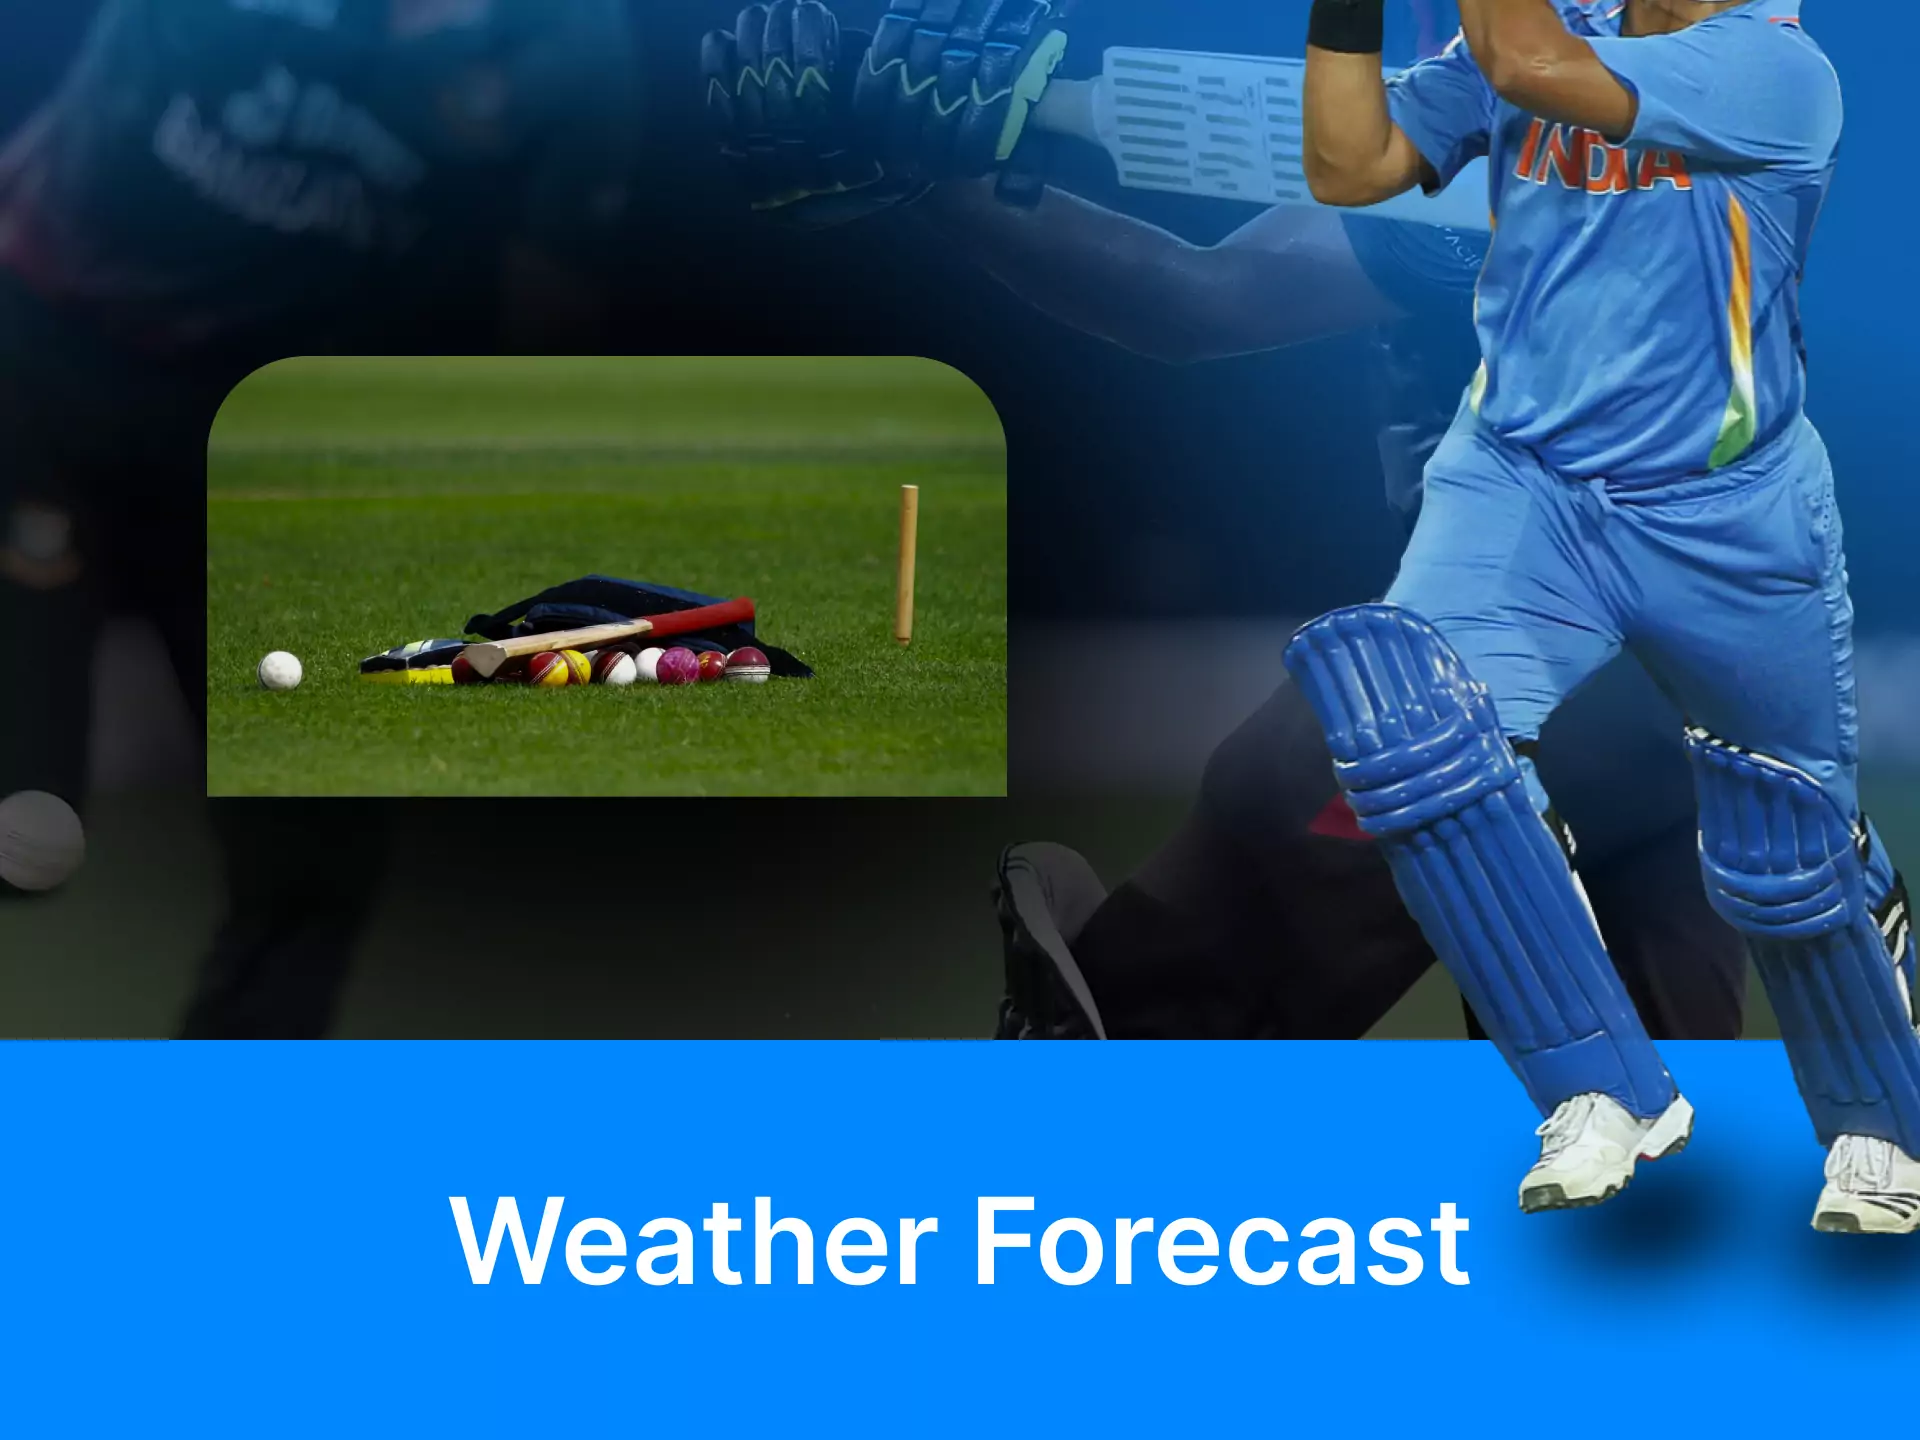 Even the weather forecast can affect the prediction of the outcome of the game.